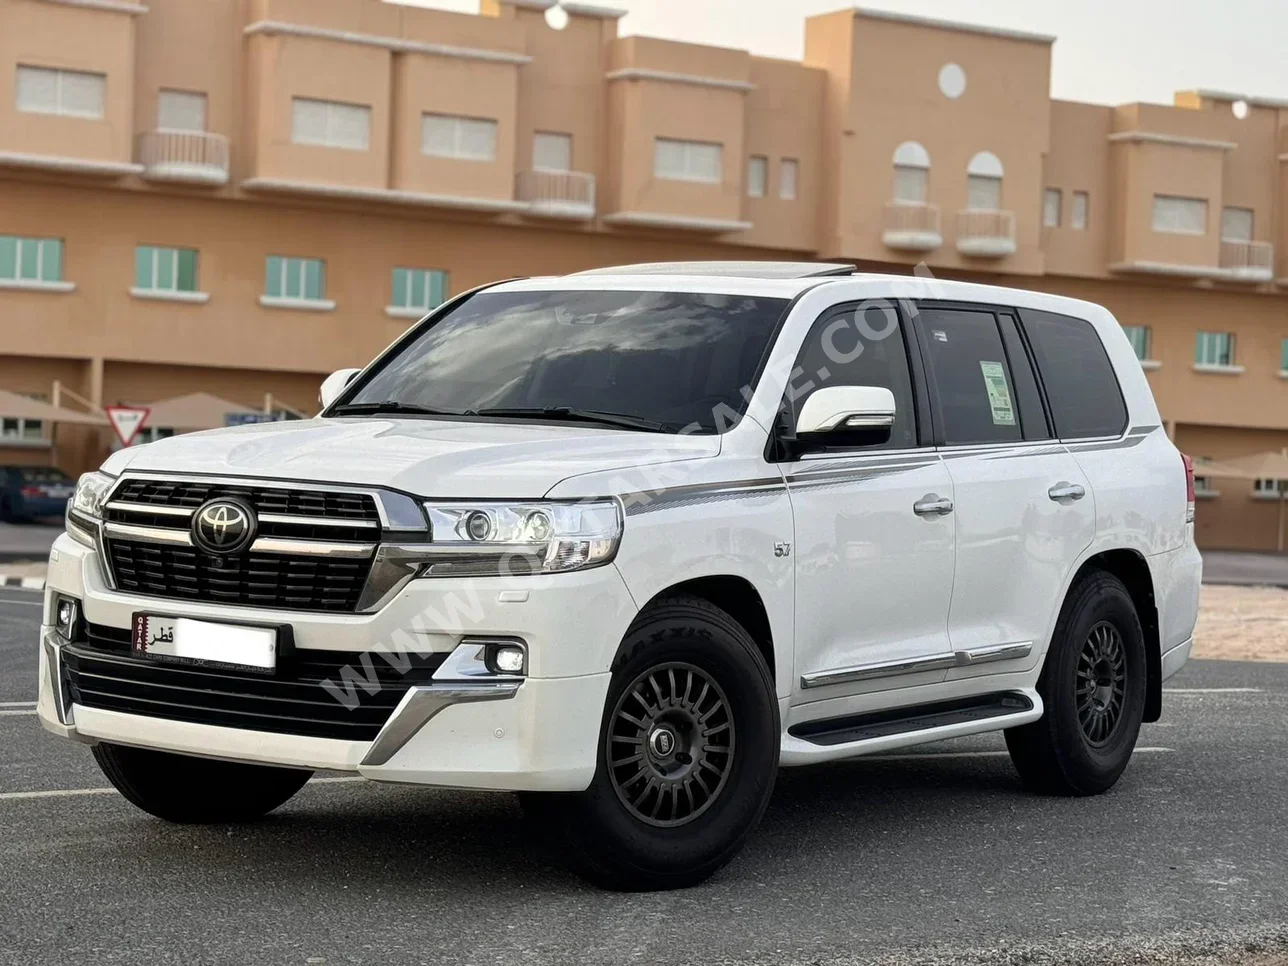 Toyota  Land Cruiser  VXR- Grand Touring S  2020  Automatic  132,000 Km  8 Cylinder  Four Wheel Drive (4WD)  SUV  White